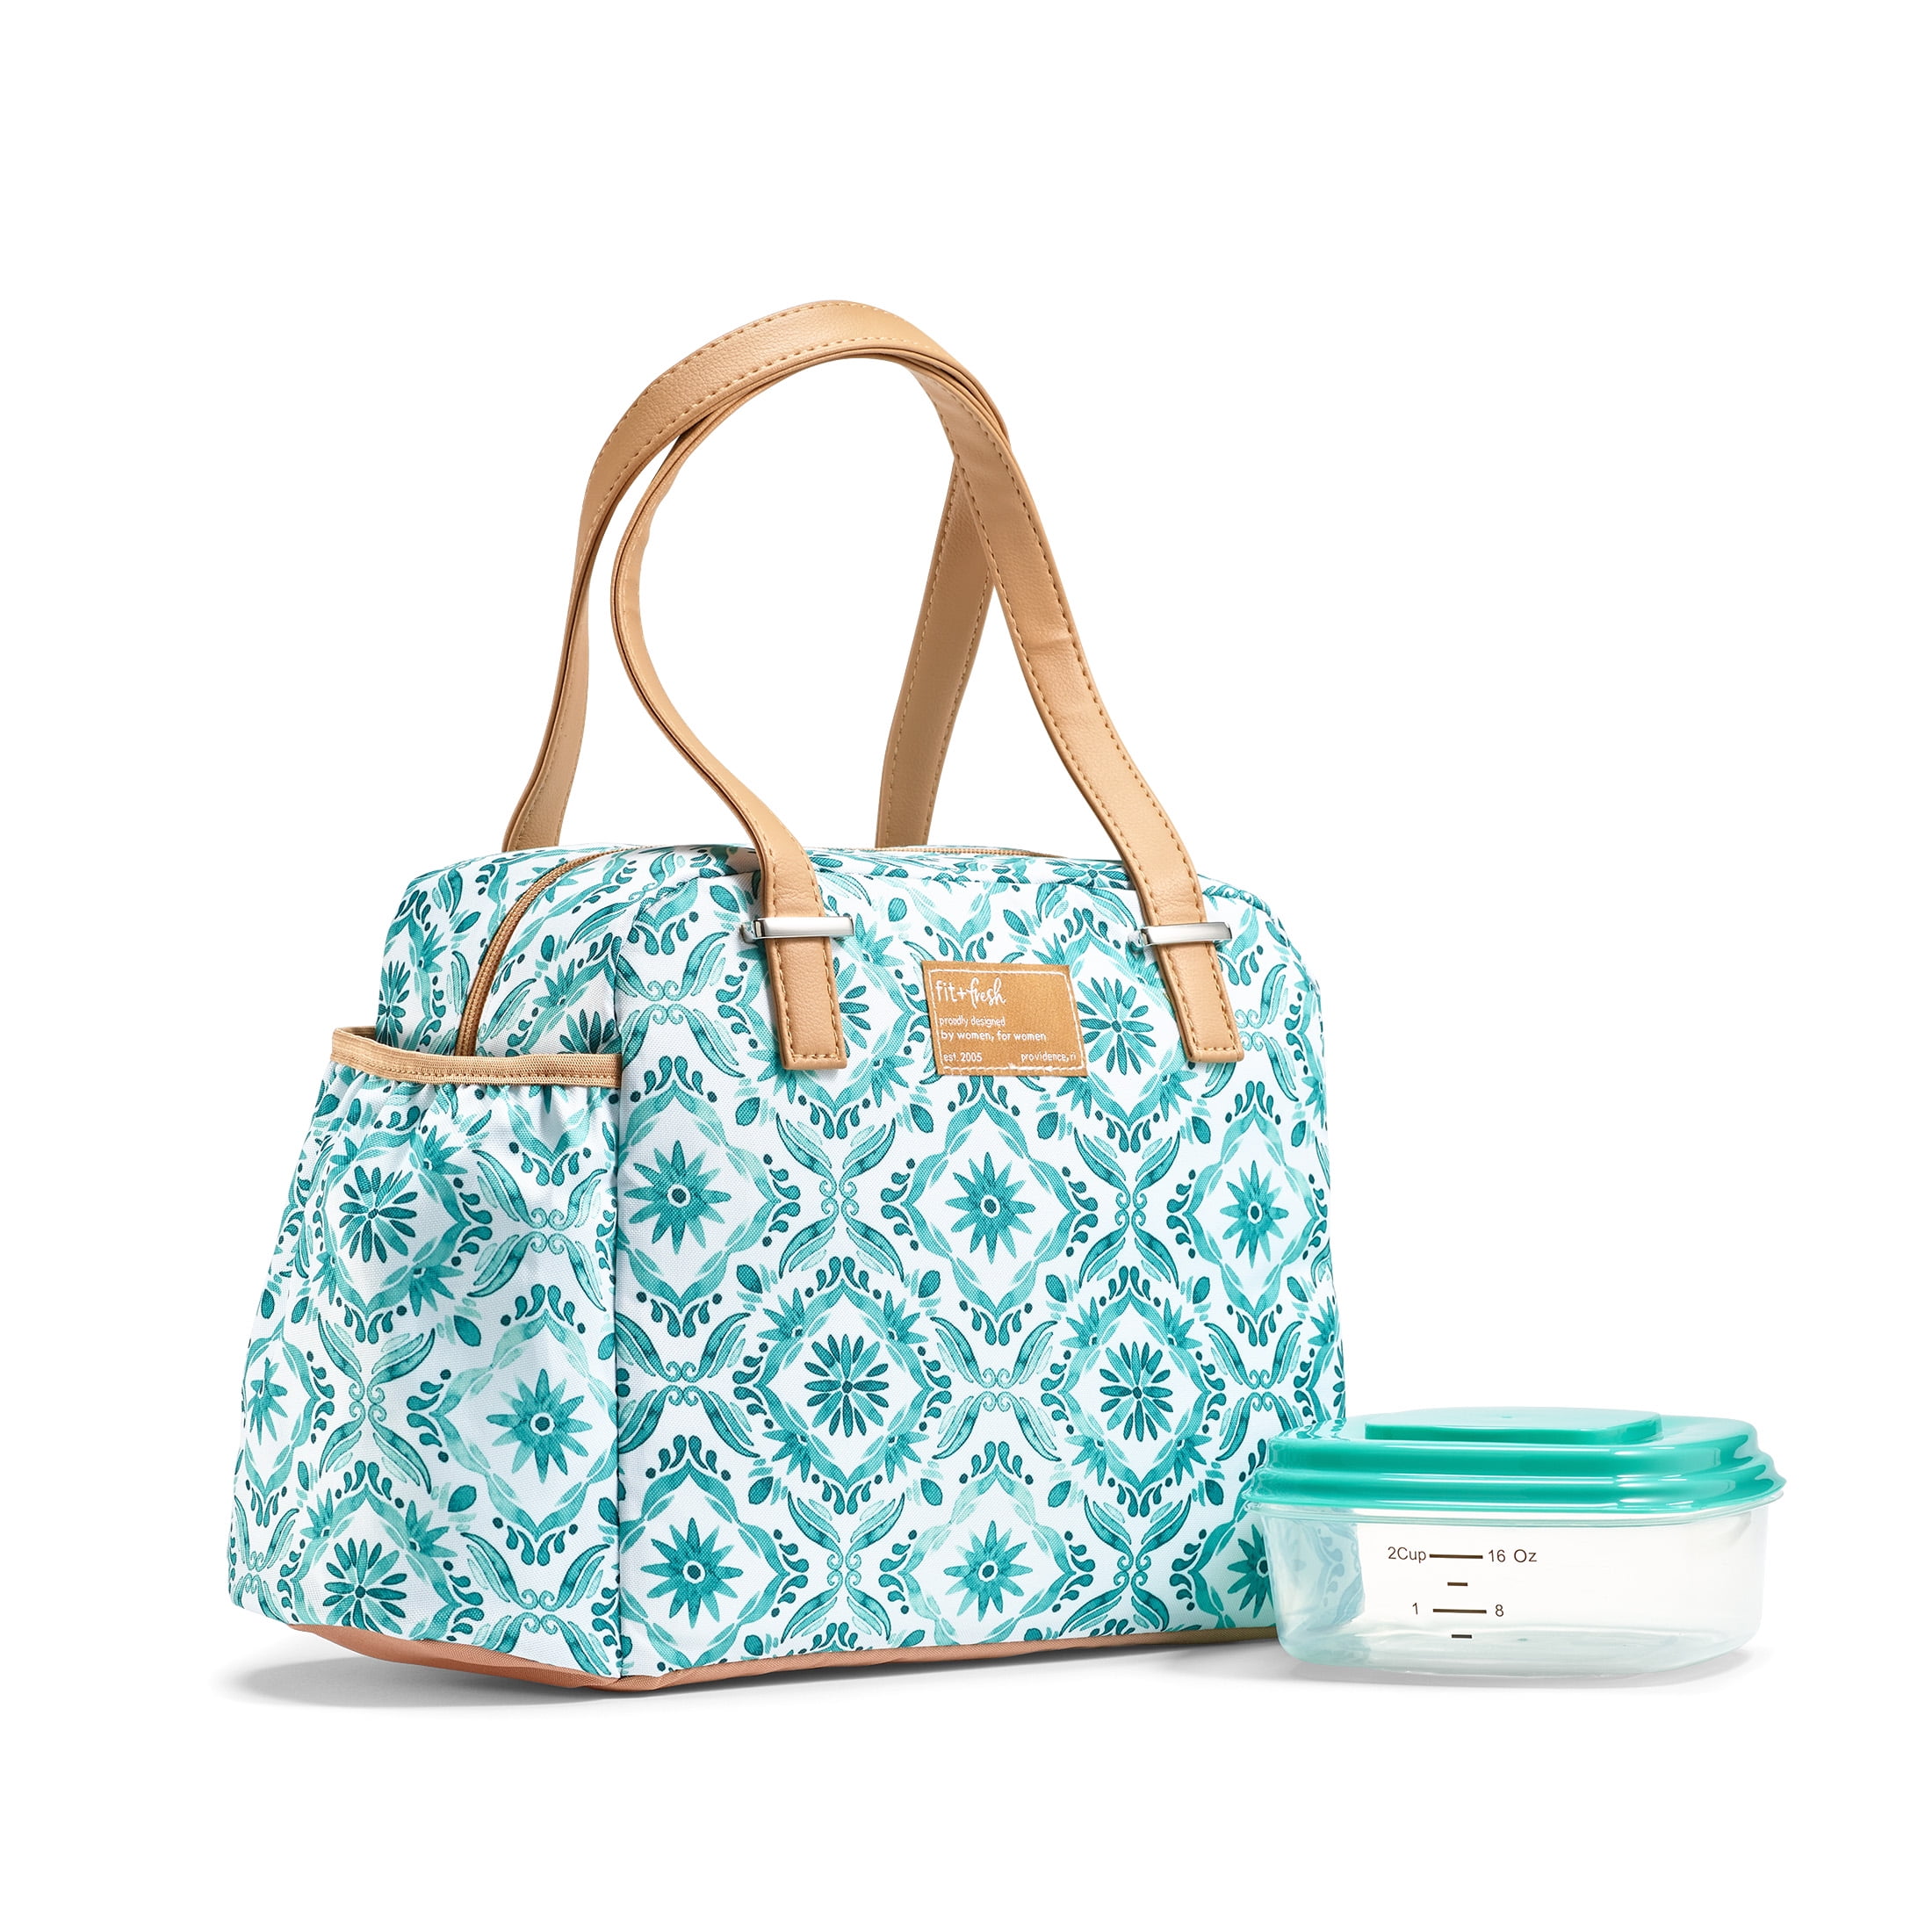 Goodbye brown bag: Shop 11 stylish lunch bags for women - Good